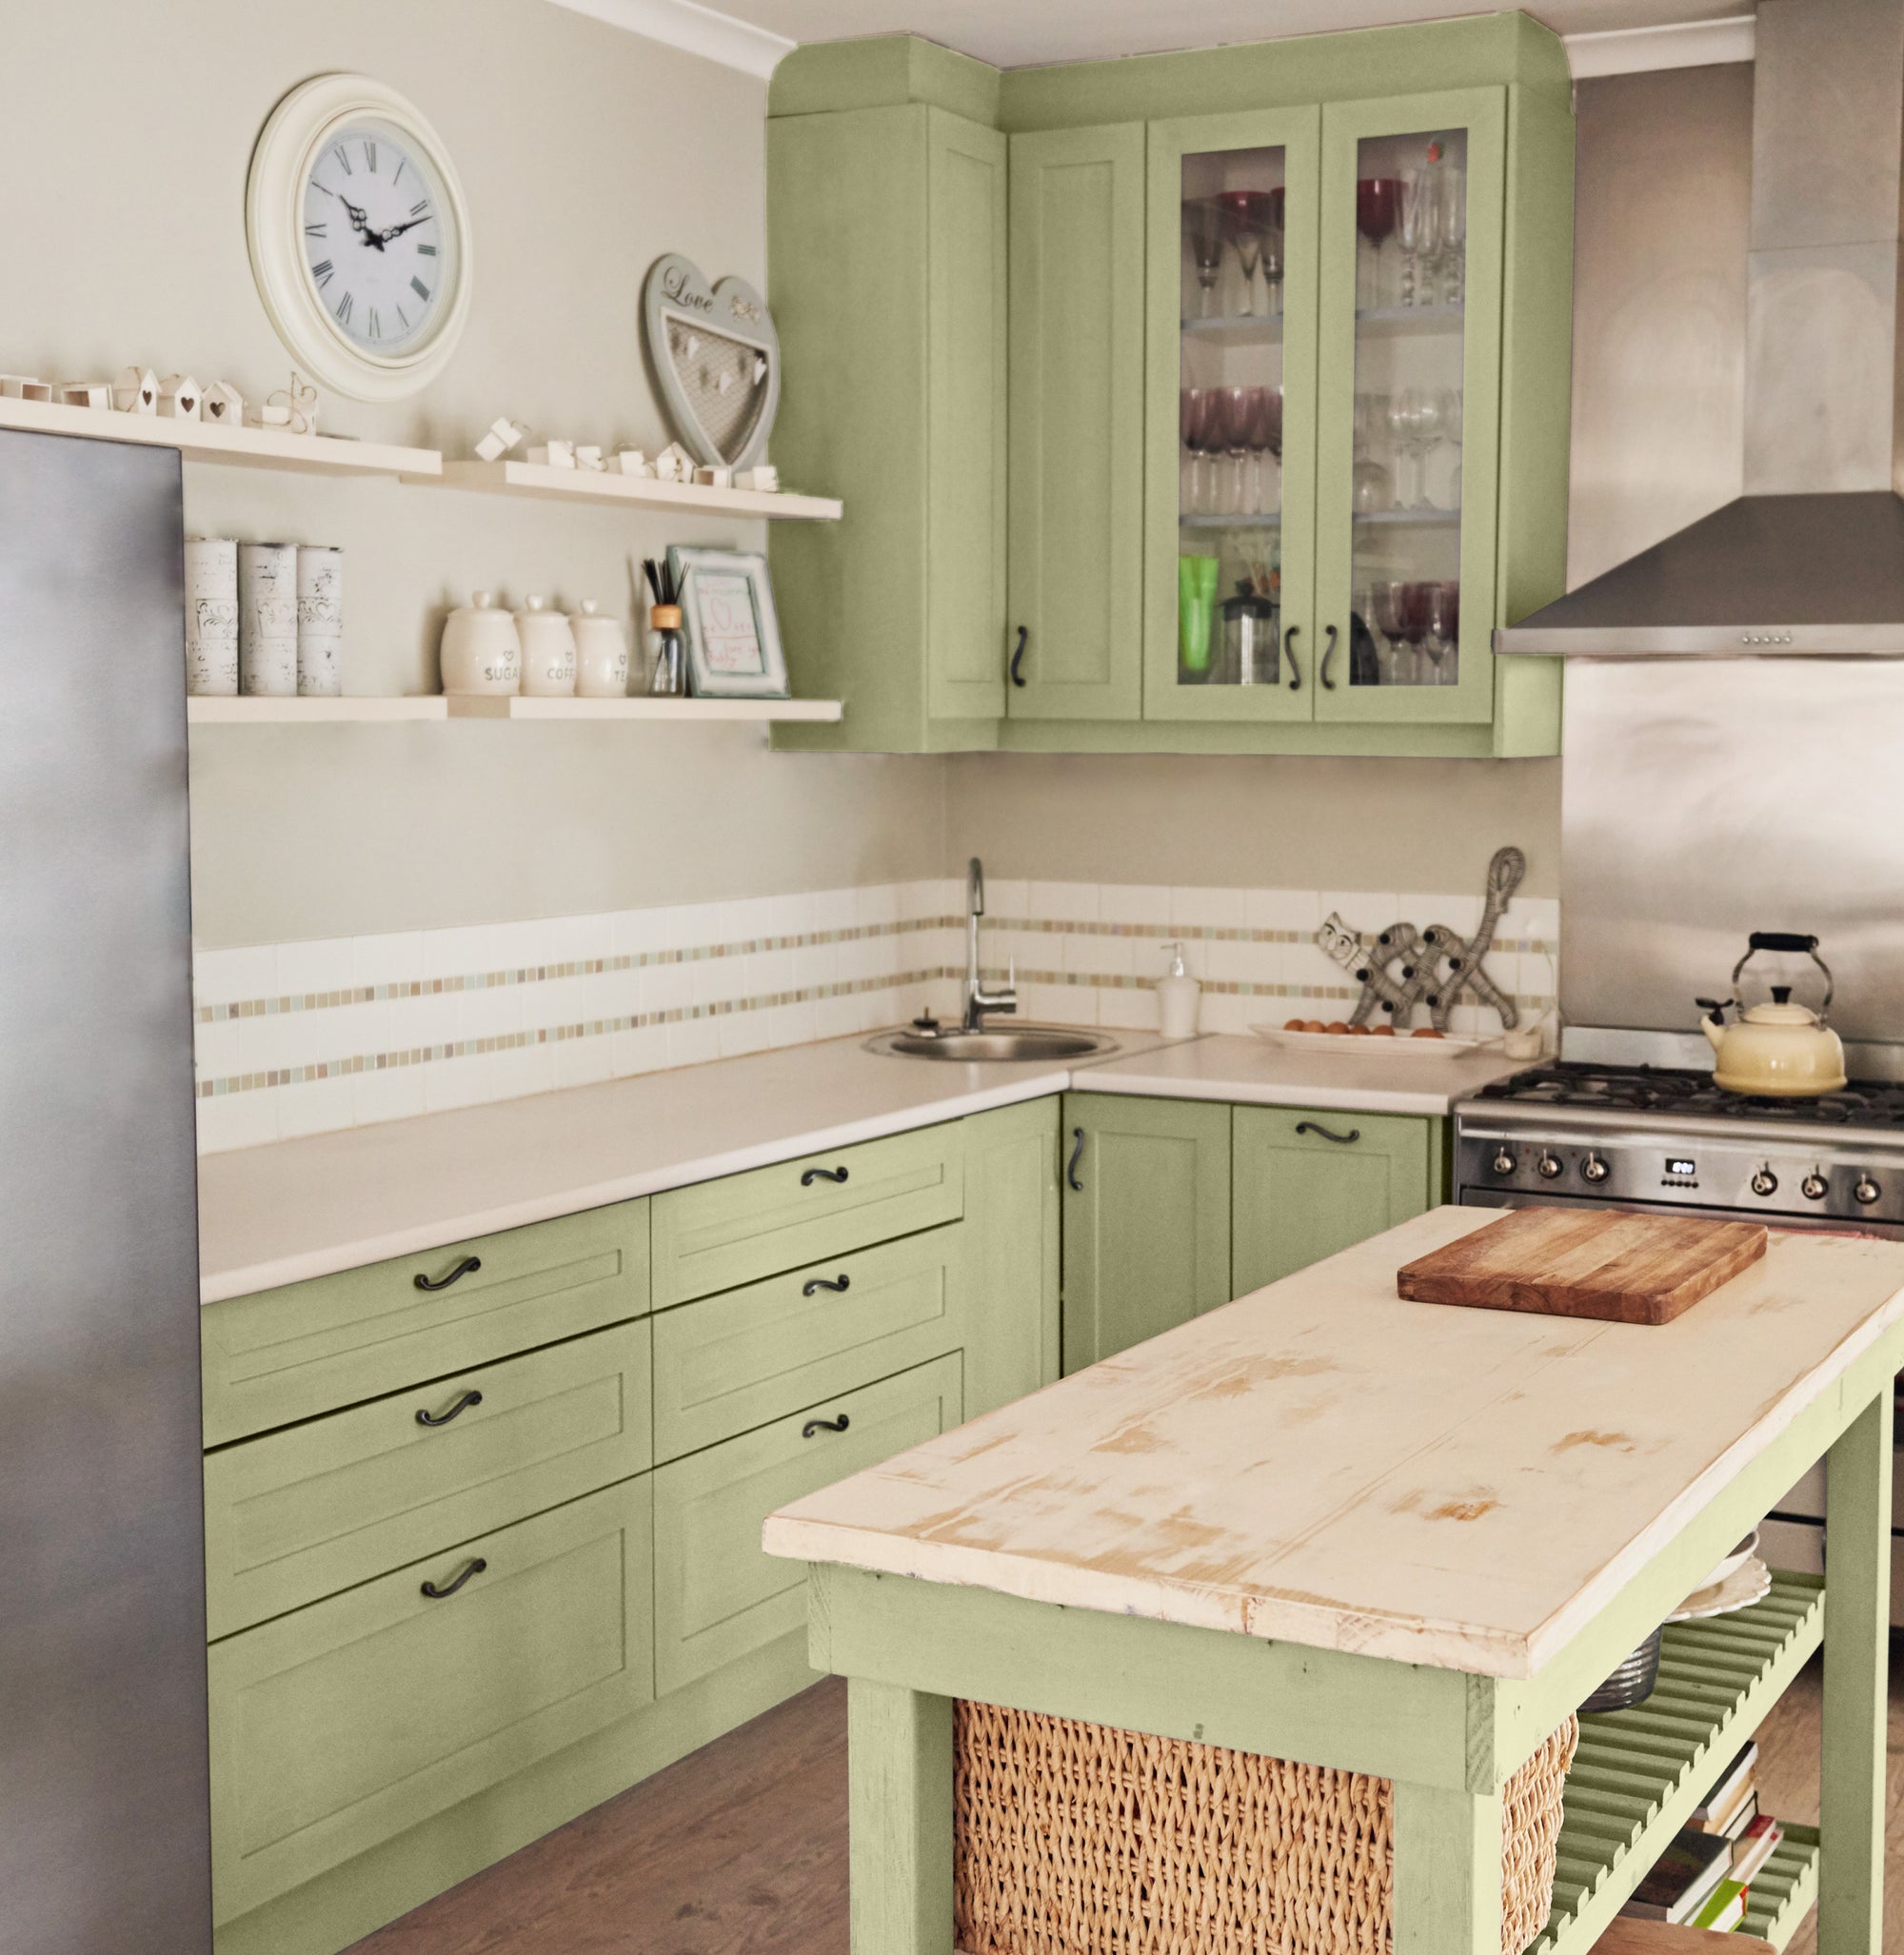 How To Paint Your Kitchen Cupboards